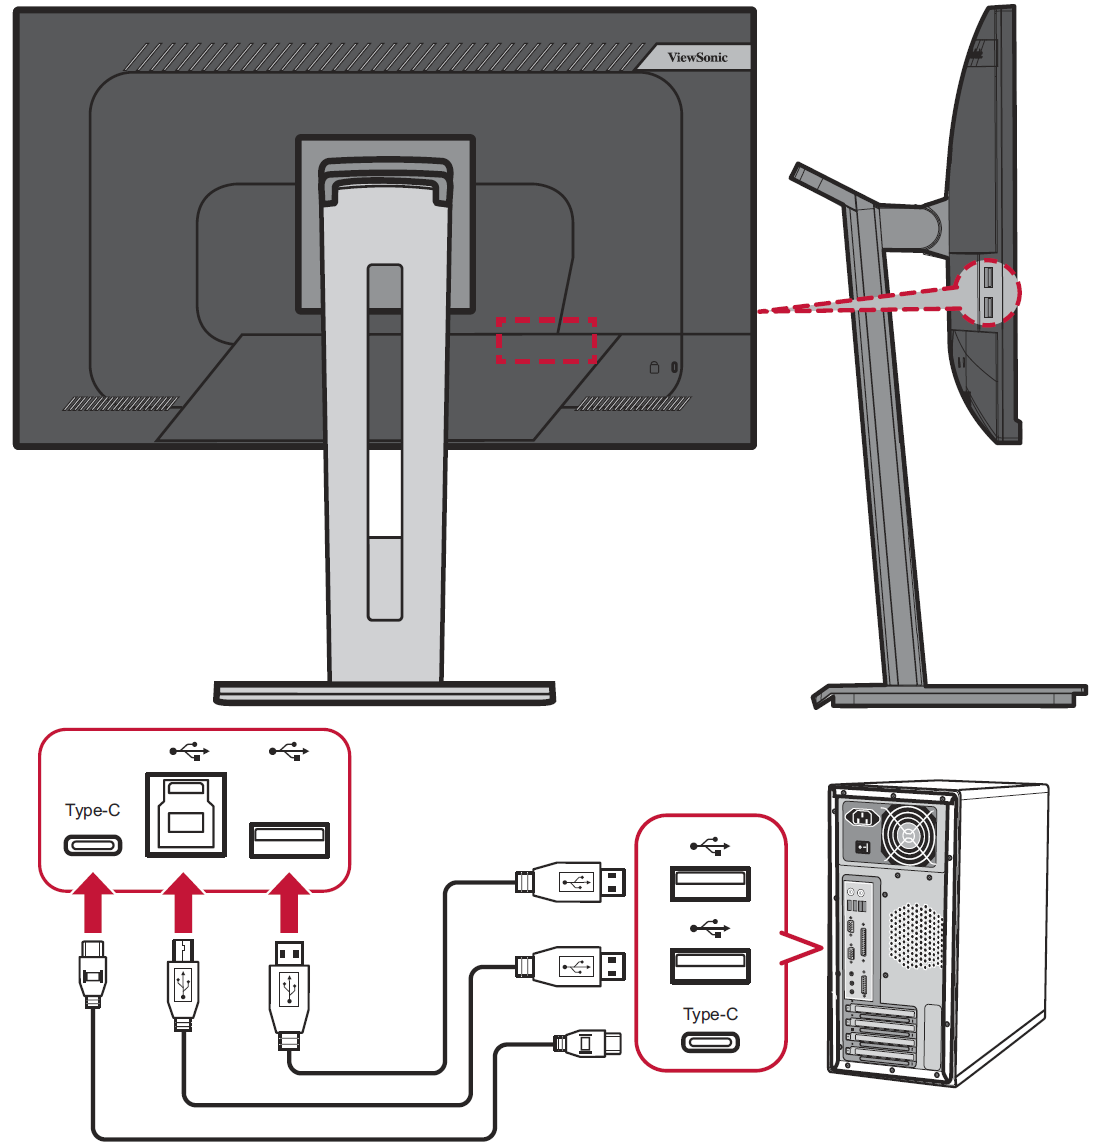 File:VG2456a Connect USB.png